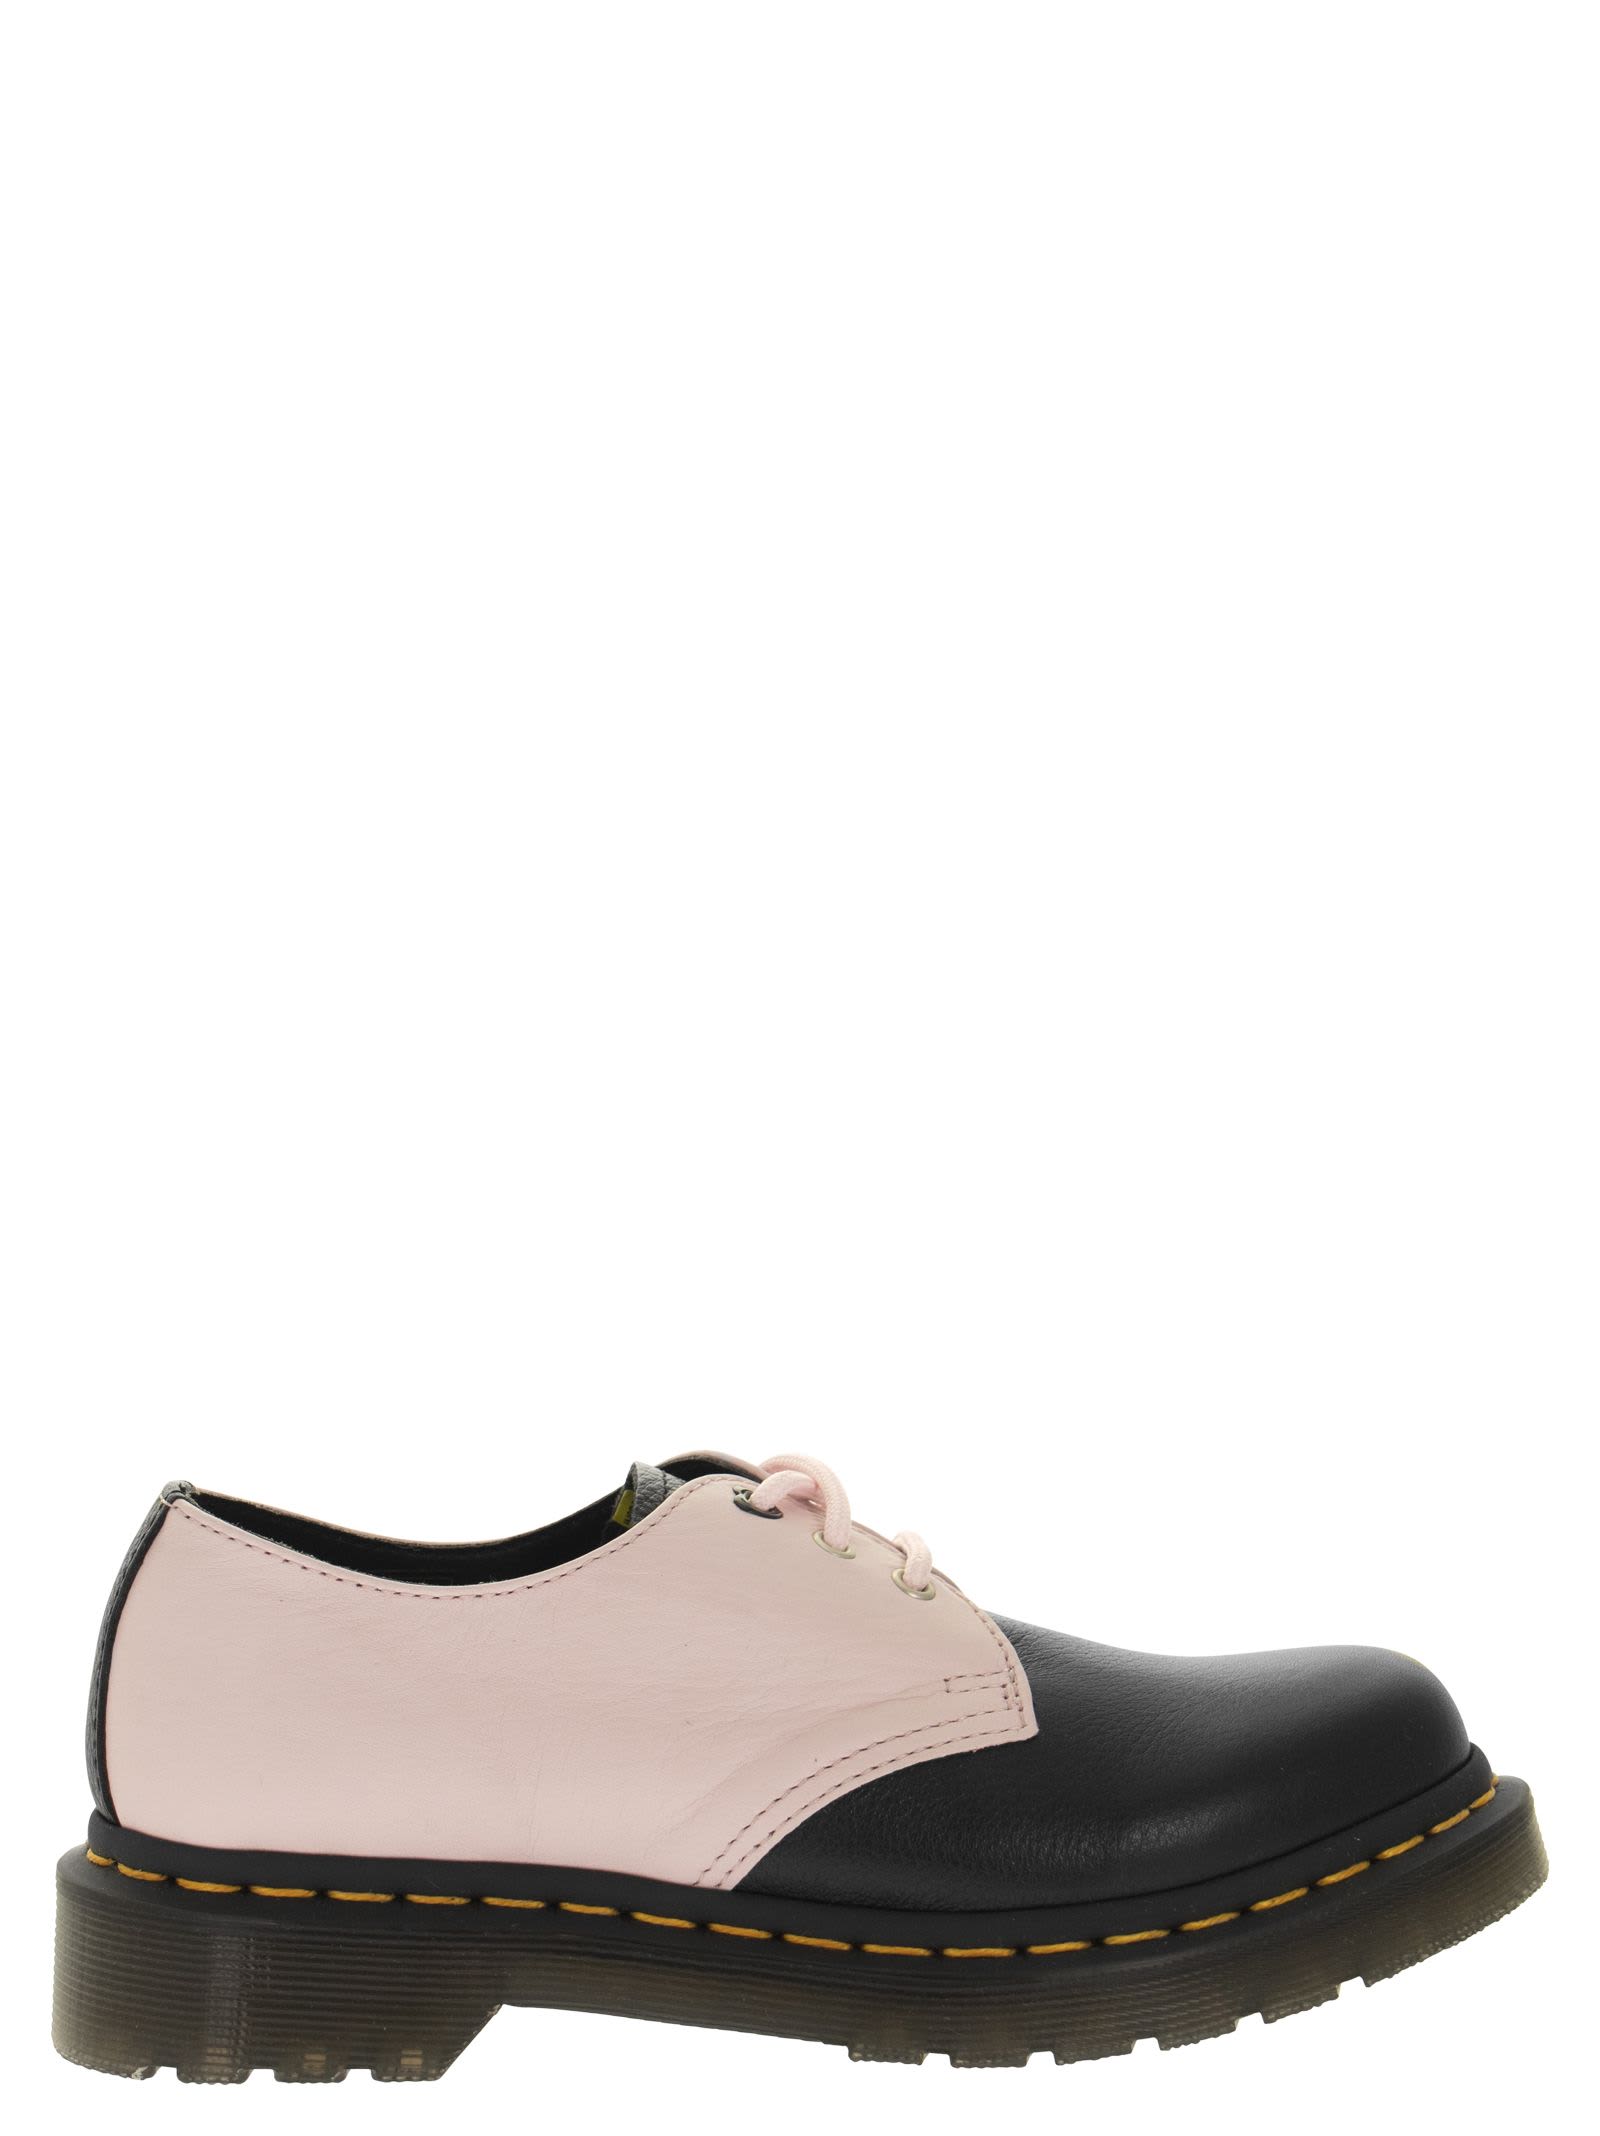 Dr. Martens 1461 Virginia - Two-tone Lace-up Shoe